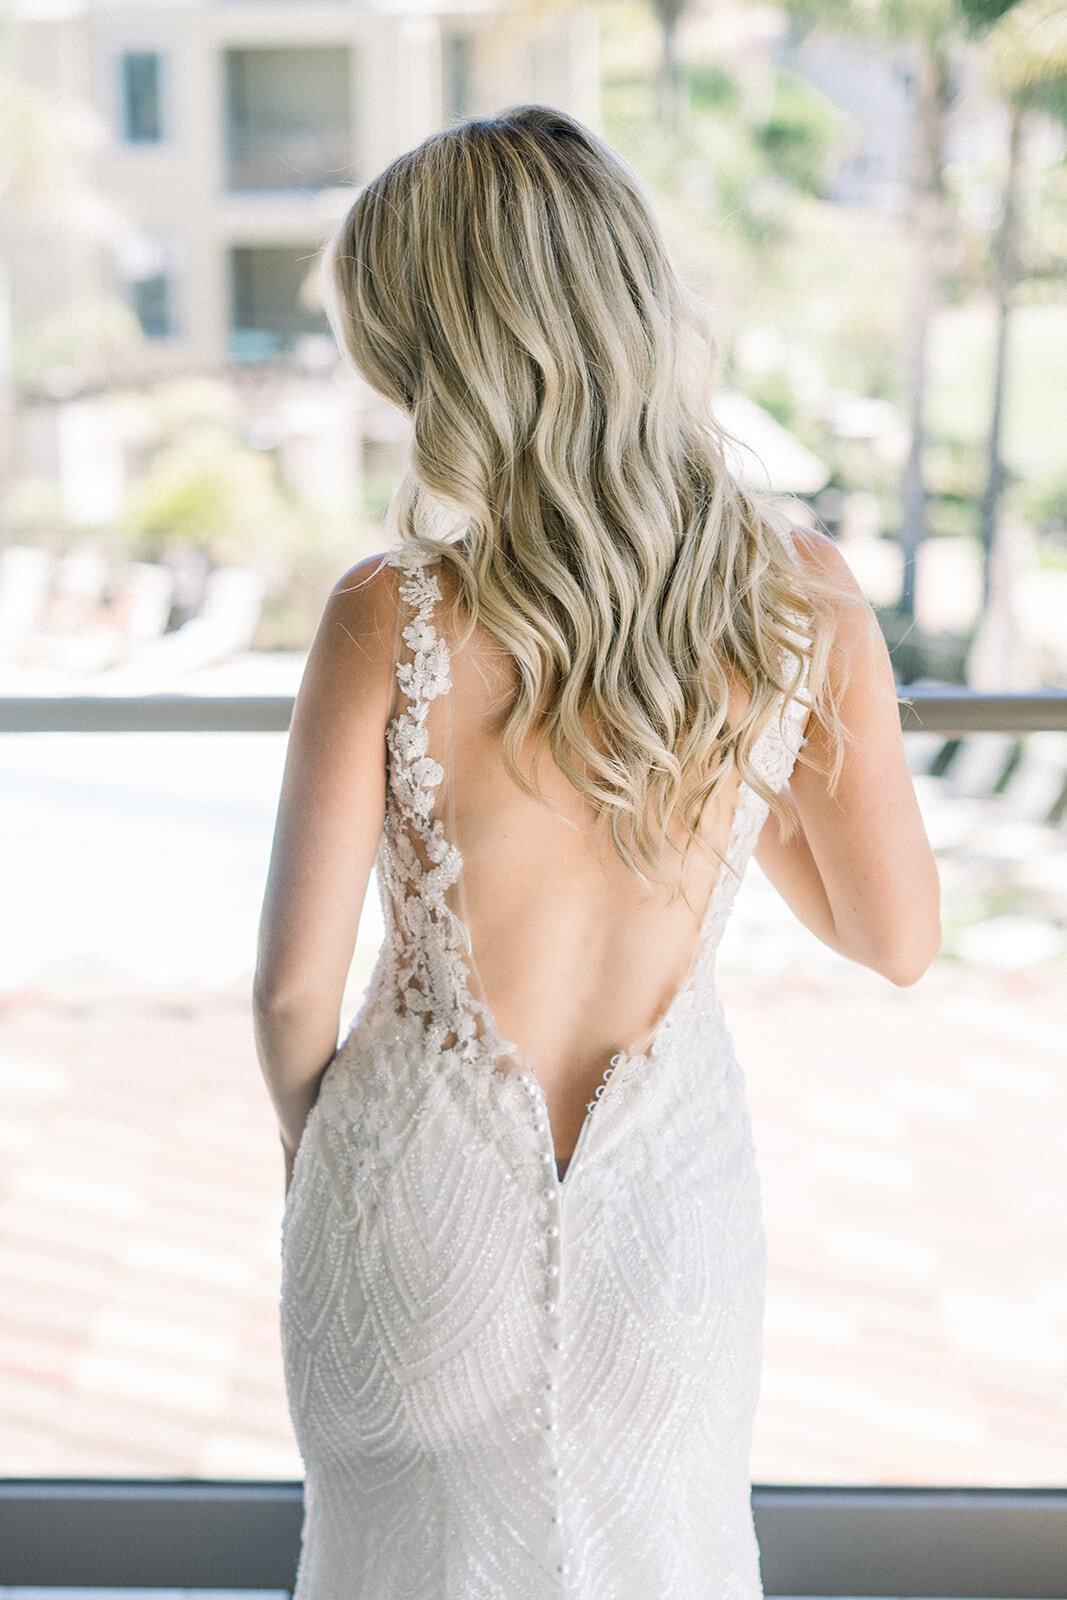 Brides backless wedding dress at Dolphin Bay Resort in Pismo Beach, CA